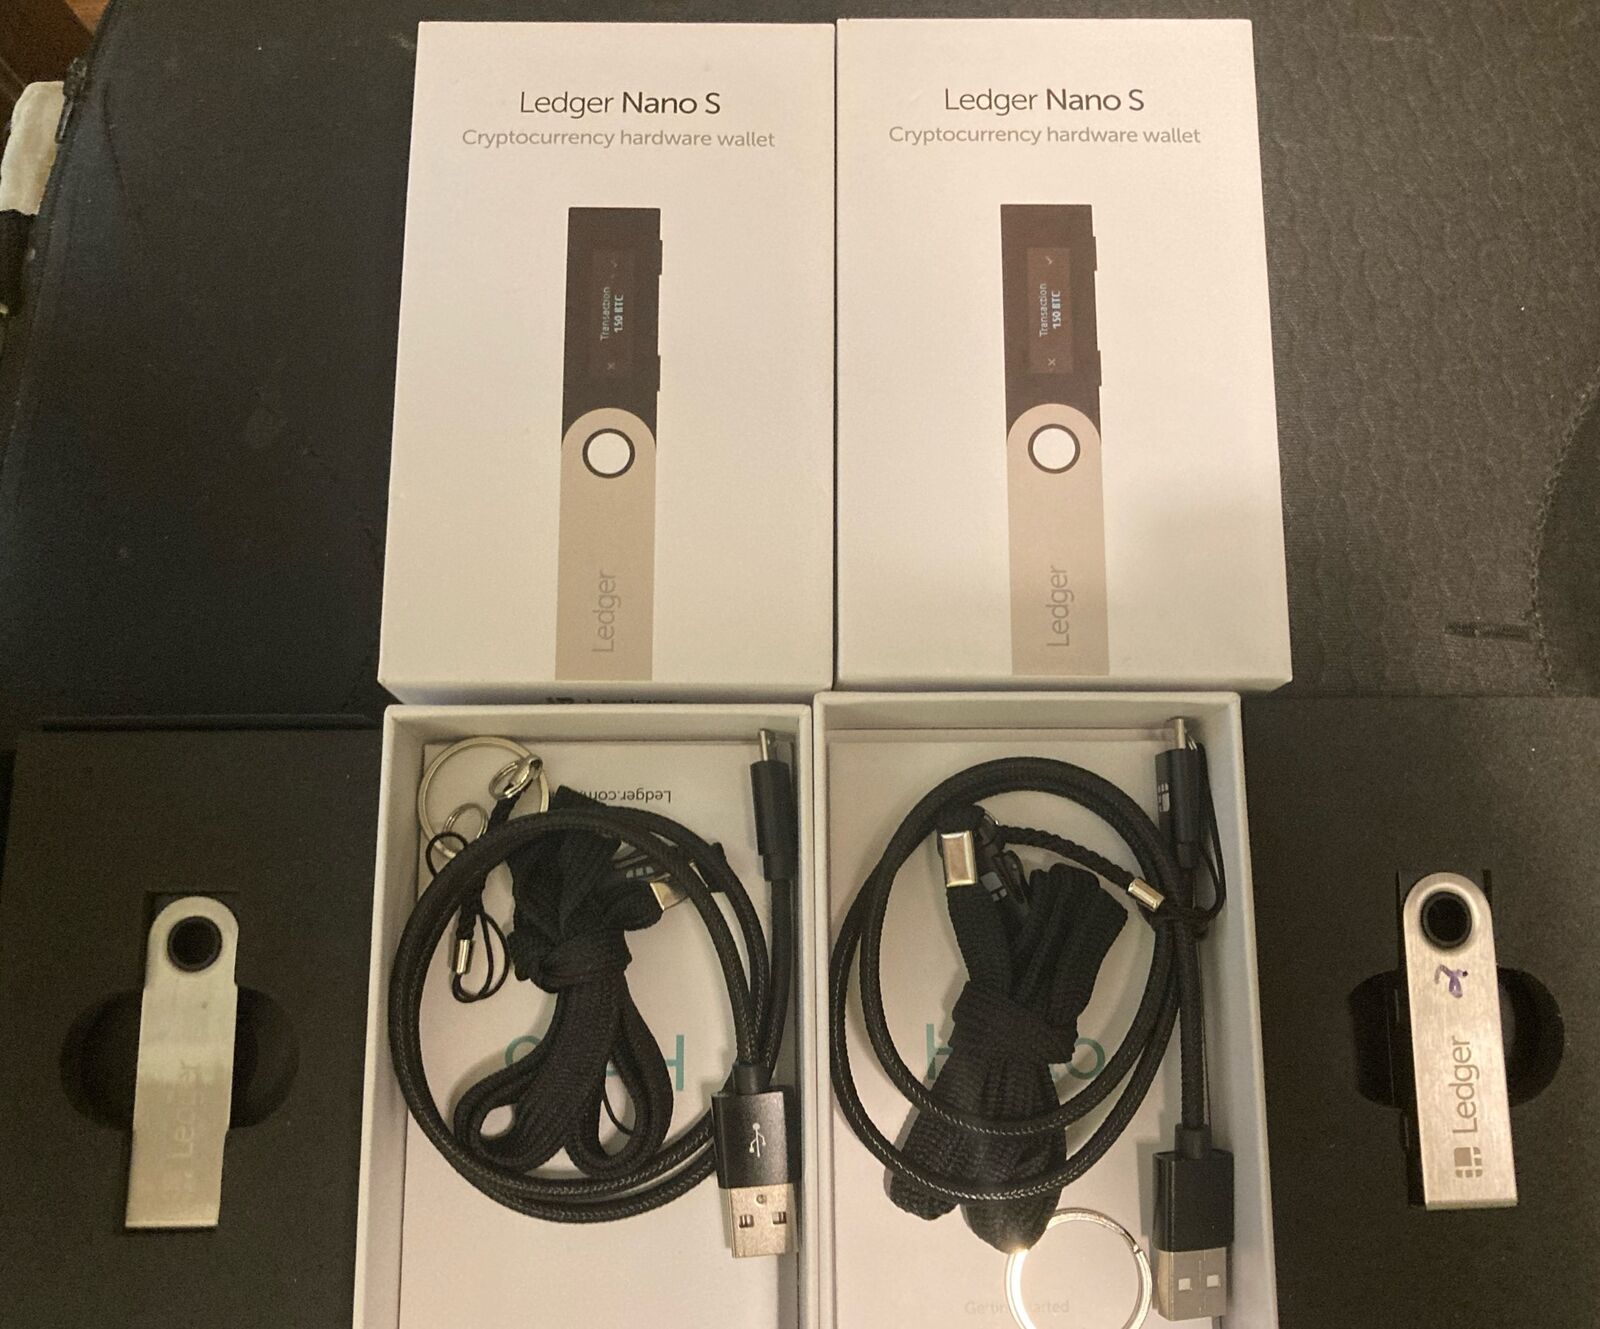 2 NANO LEDGER S Cryptocurrency Hardware Wallets Preowned